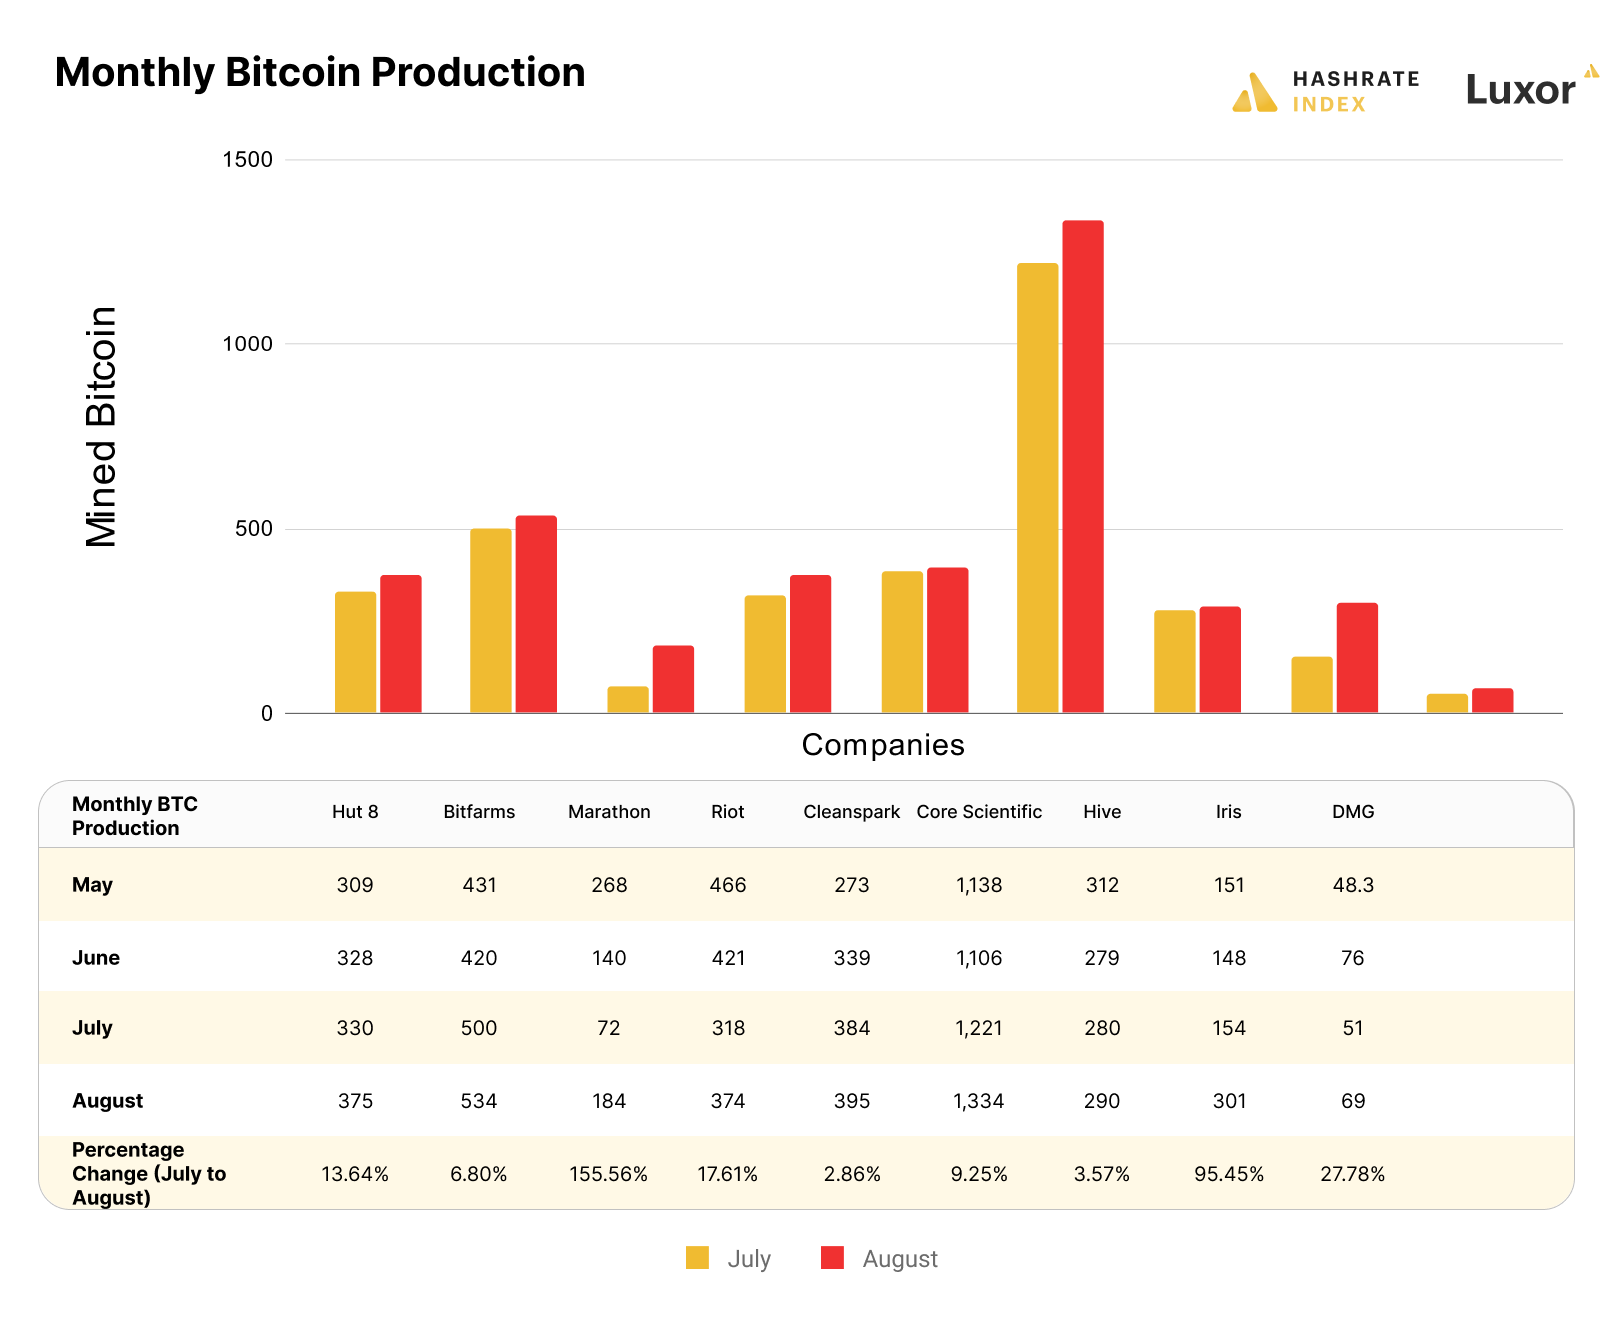 Bitcoin mining stock monthly BTC production in July and August, 2022 | Source: public disclosures 